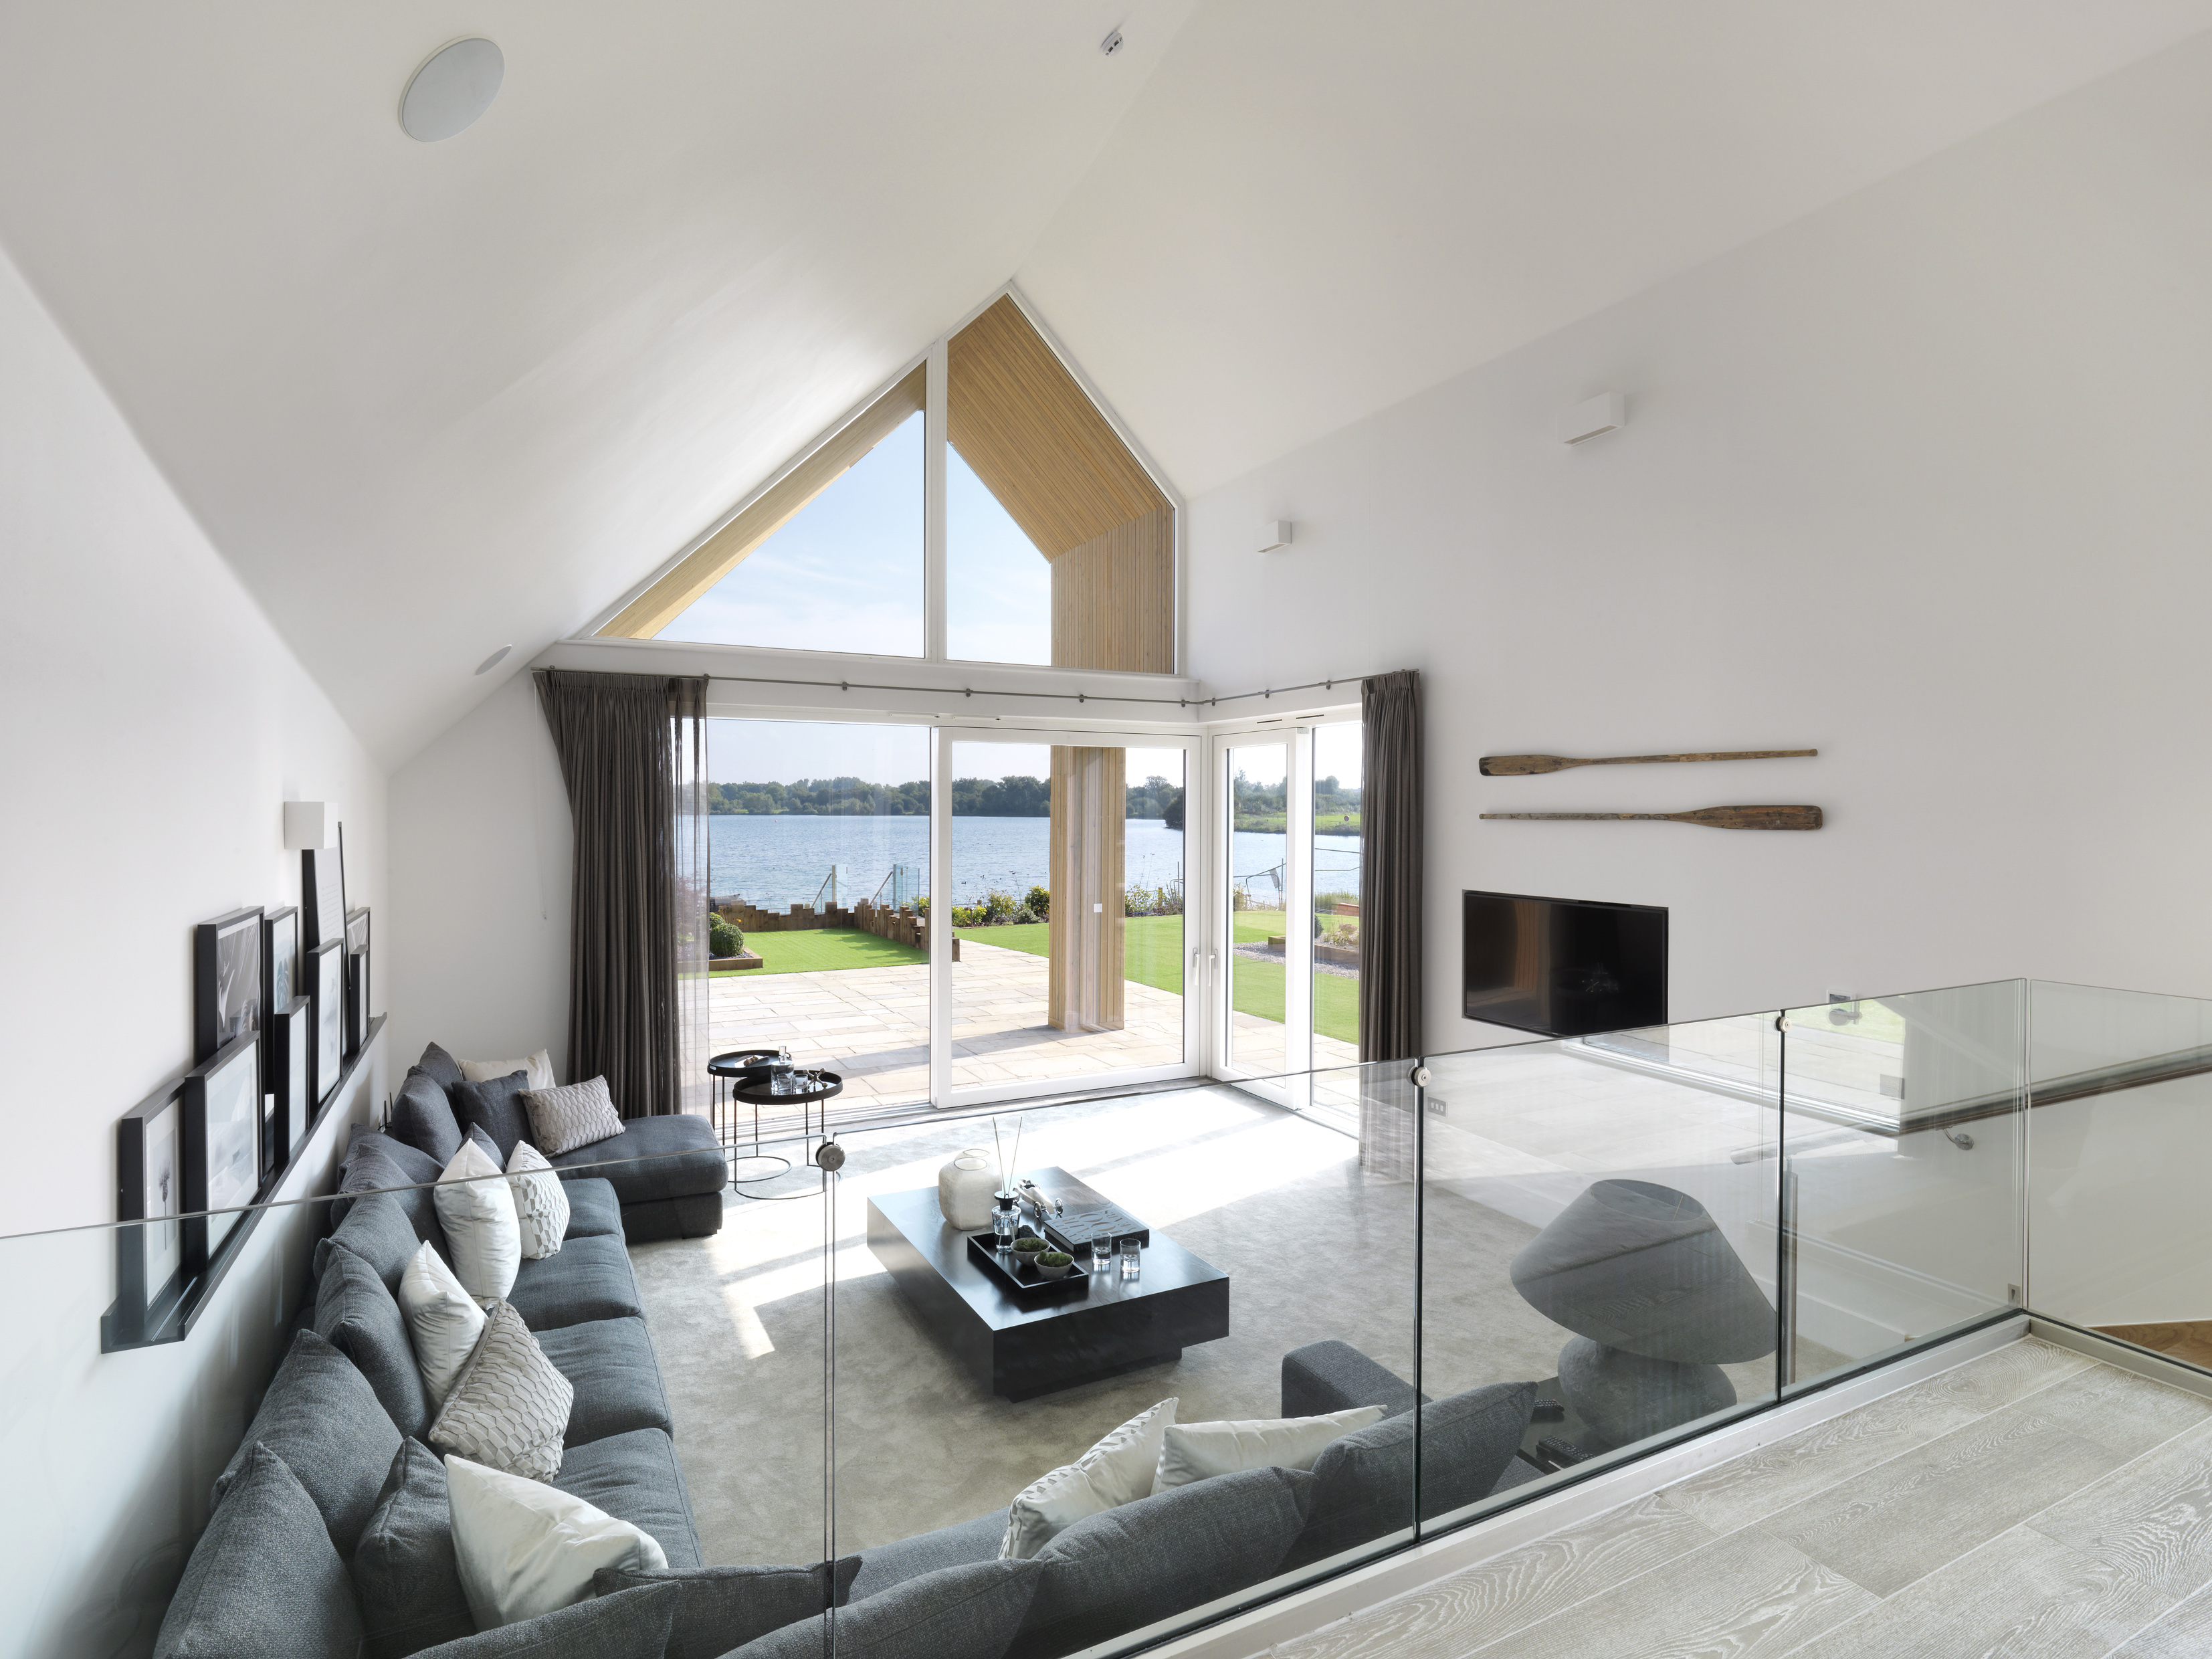 </p> <p>Find your ideal home design pro on designfor-me.com - get matched and see who's interested in your home project. Click image to see more inspiration from our design pros</p> <p>Design by Julian, architect from Bath and North East Somerset, South West</p> <p>#architecture #homedesign #modernhomes #homeinspiration #livingrooms #livingroomdesign #livingroominspiration #livingroomideas #doubleheightspace</p> <p>